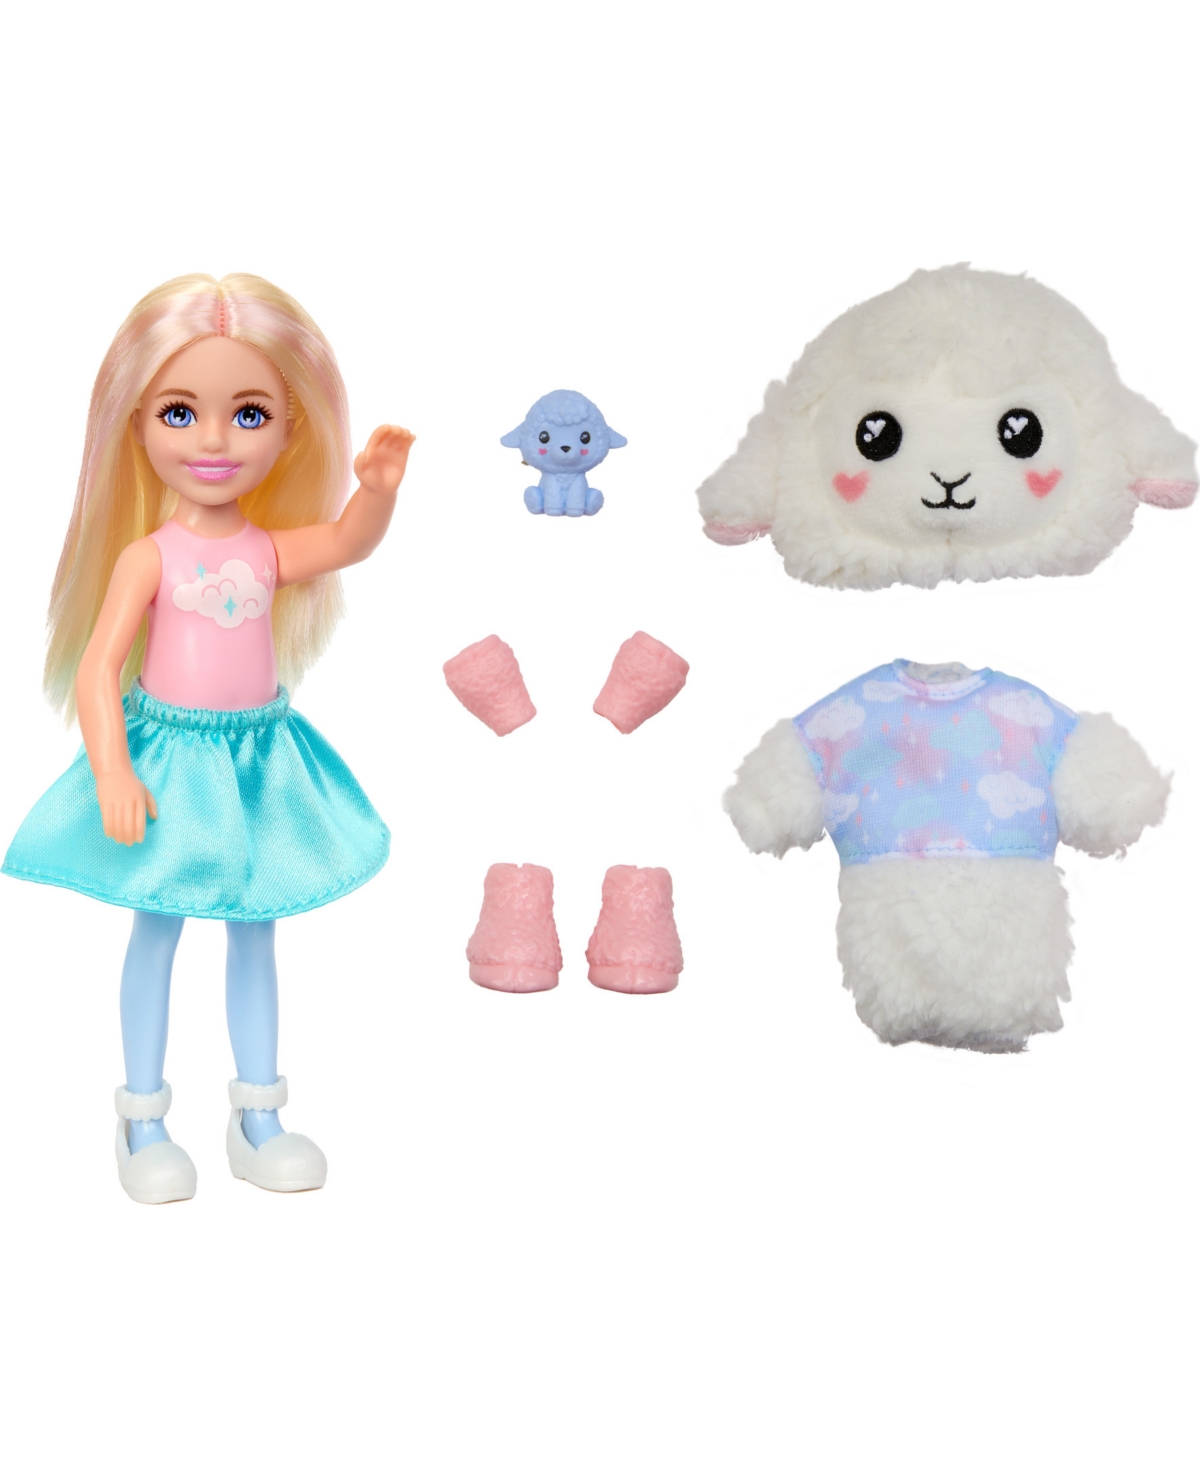 Barbie Kids' Cutie Reveal Doll And Accessories, Cozy Cute T-shirts Lion, "hope" T-shirt, Purple-streaked Blonde H In Multi-color